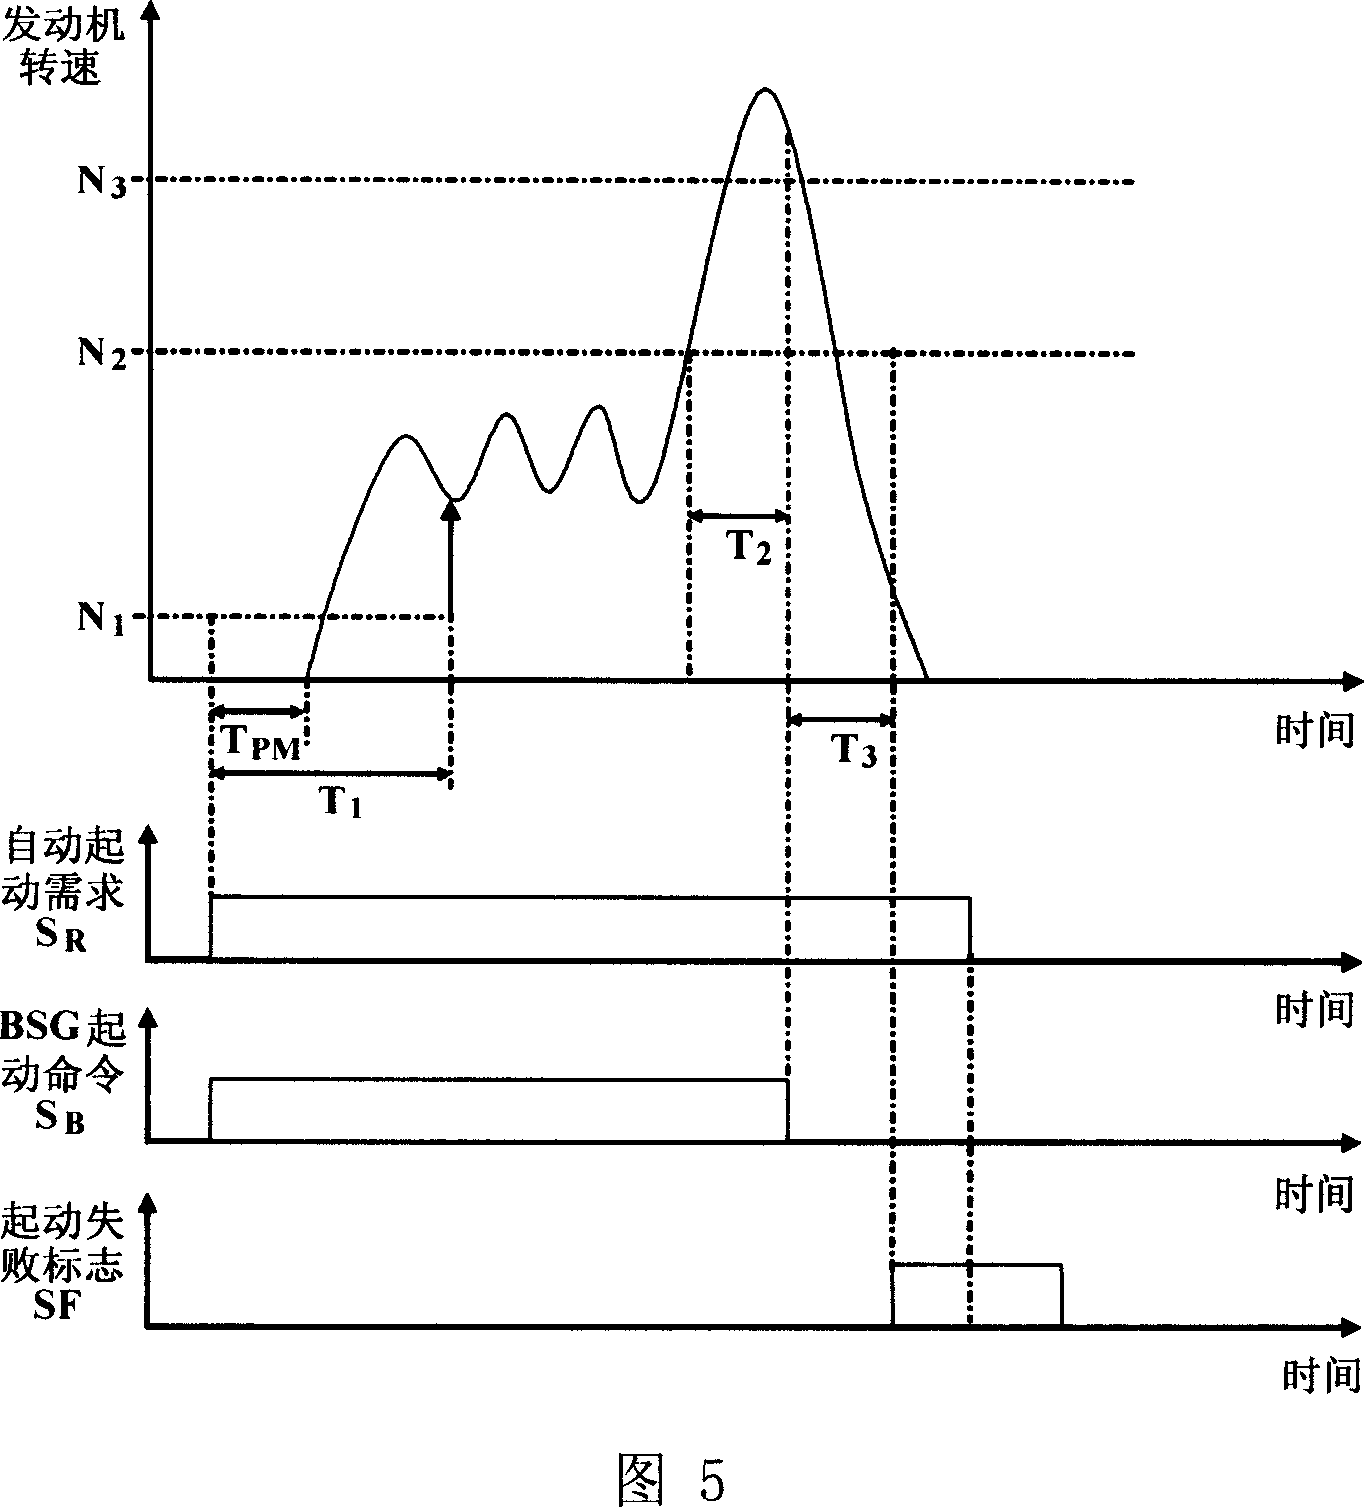 Method for controlling engine starting of blended power electric automobile